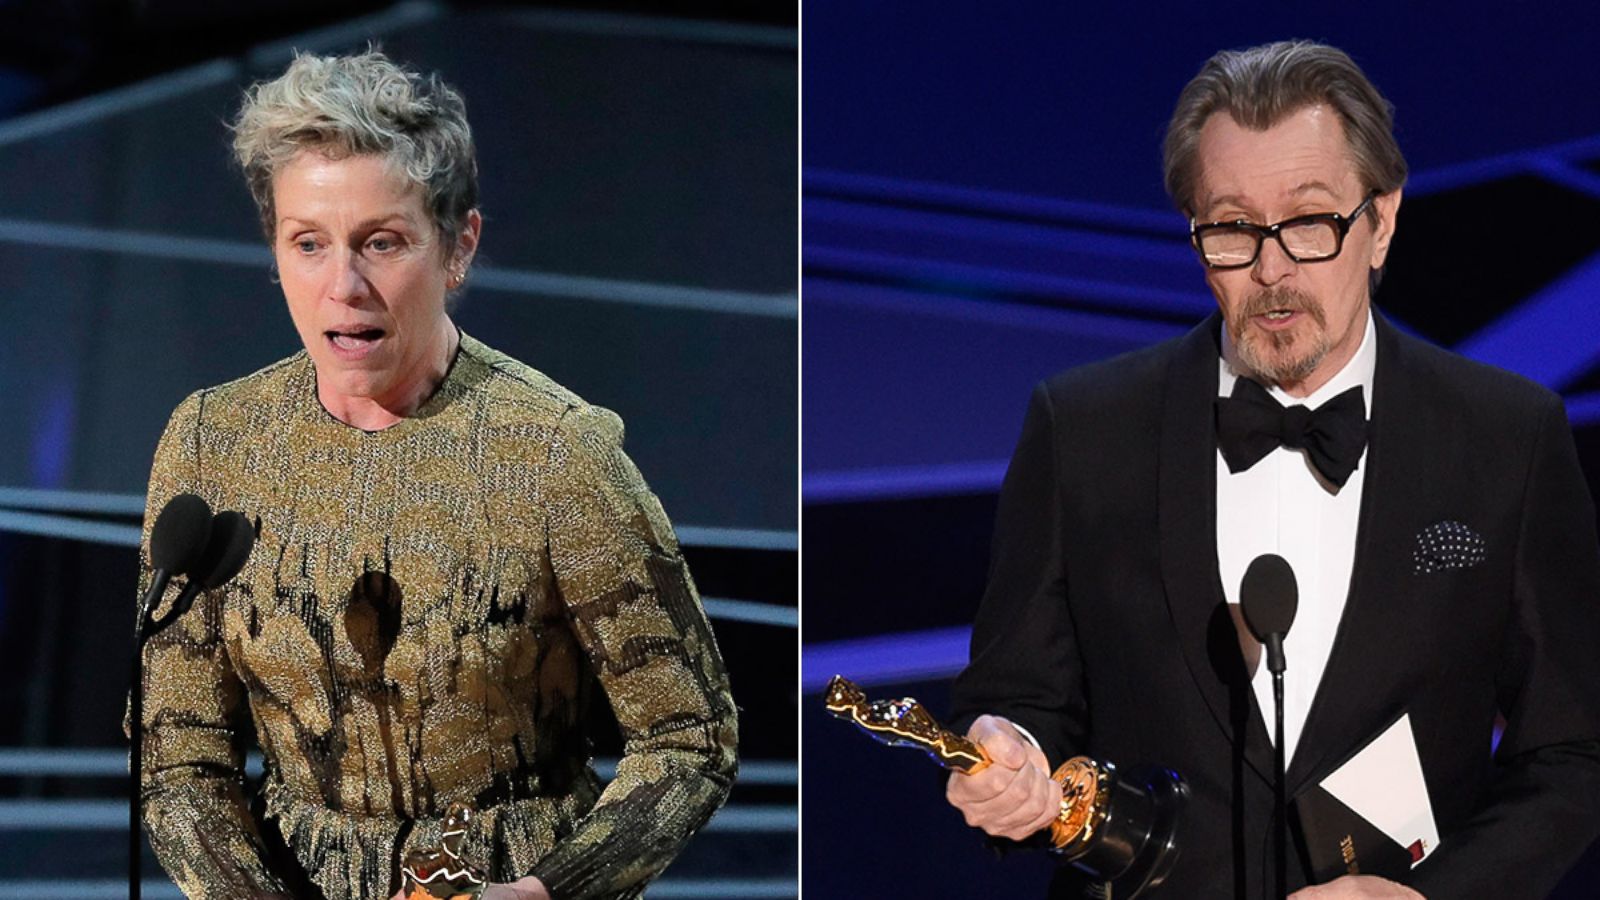 PHOTO: Frances McDormand, left, and Gary Oldman on stage at the 90th Academy Awards in Los Angeles, March 4, 2018.